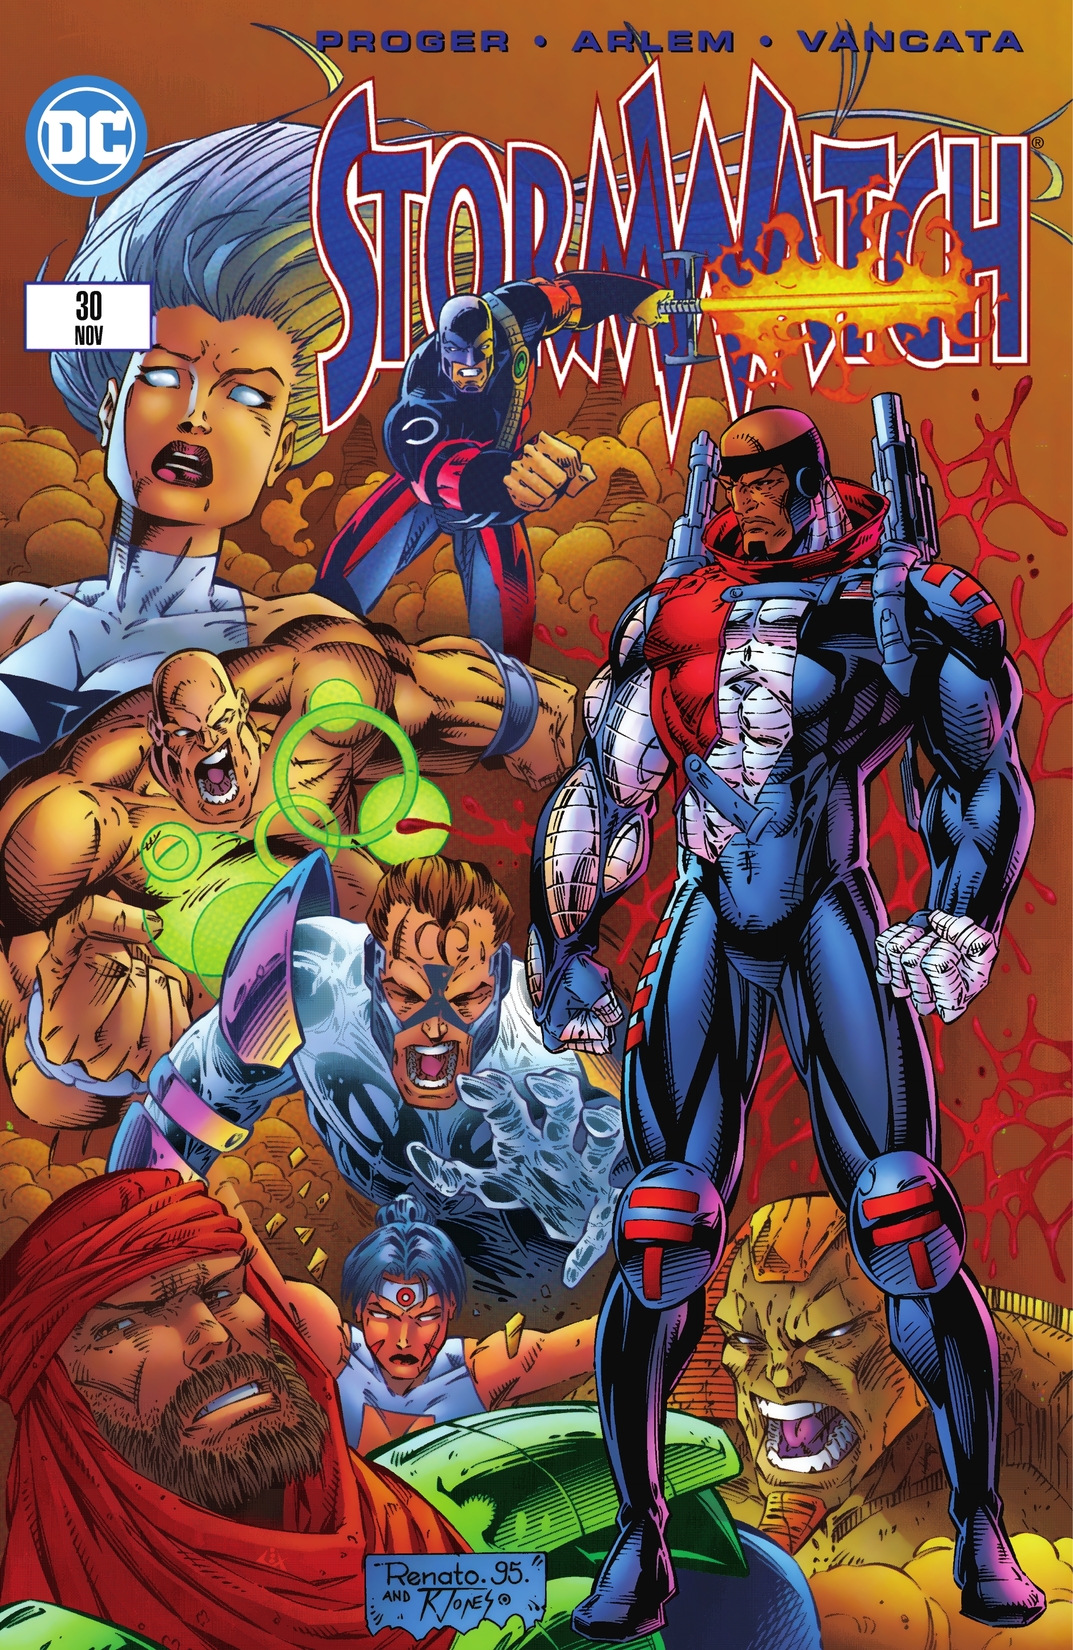 Stormwatch (1993-1997) #30 preview images